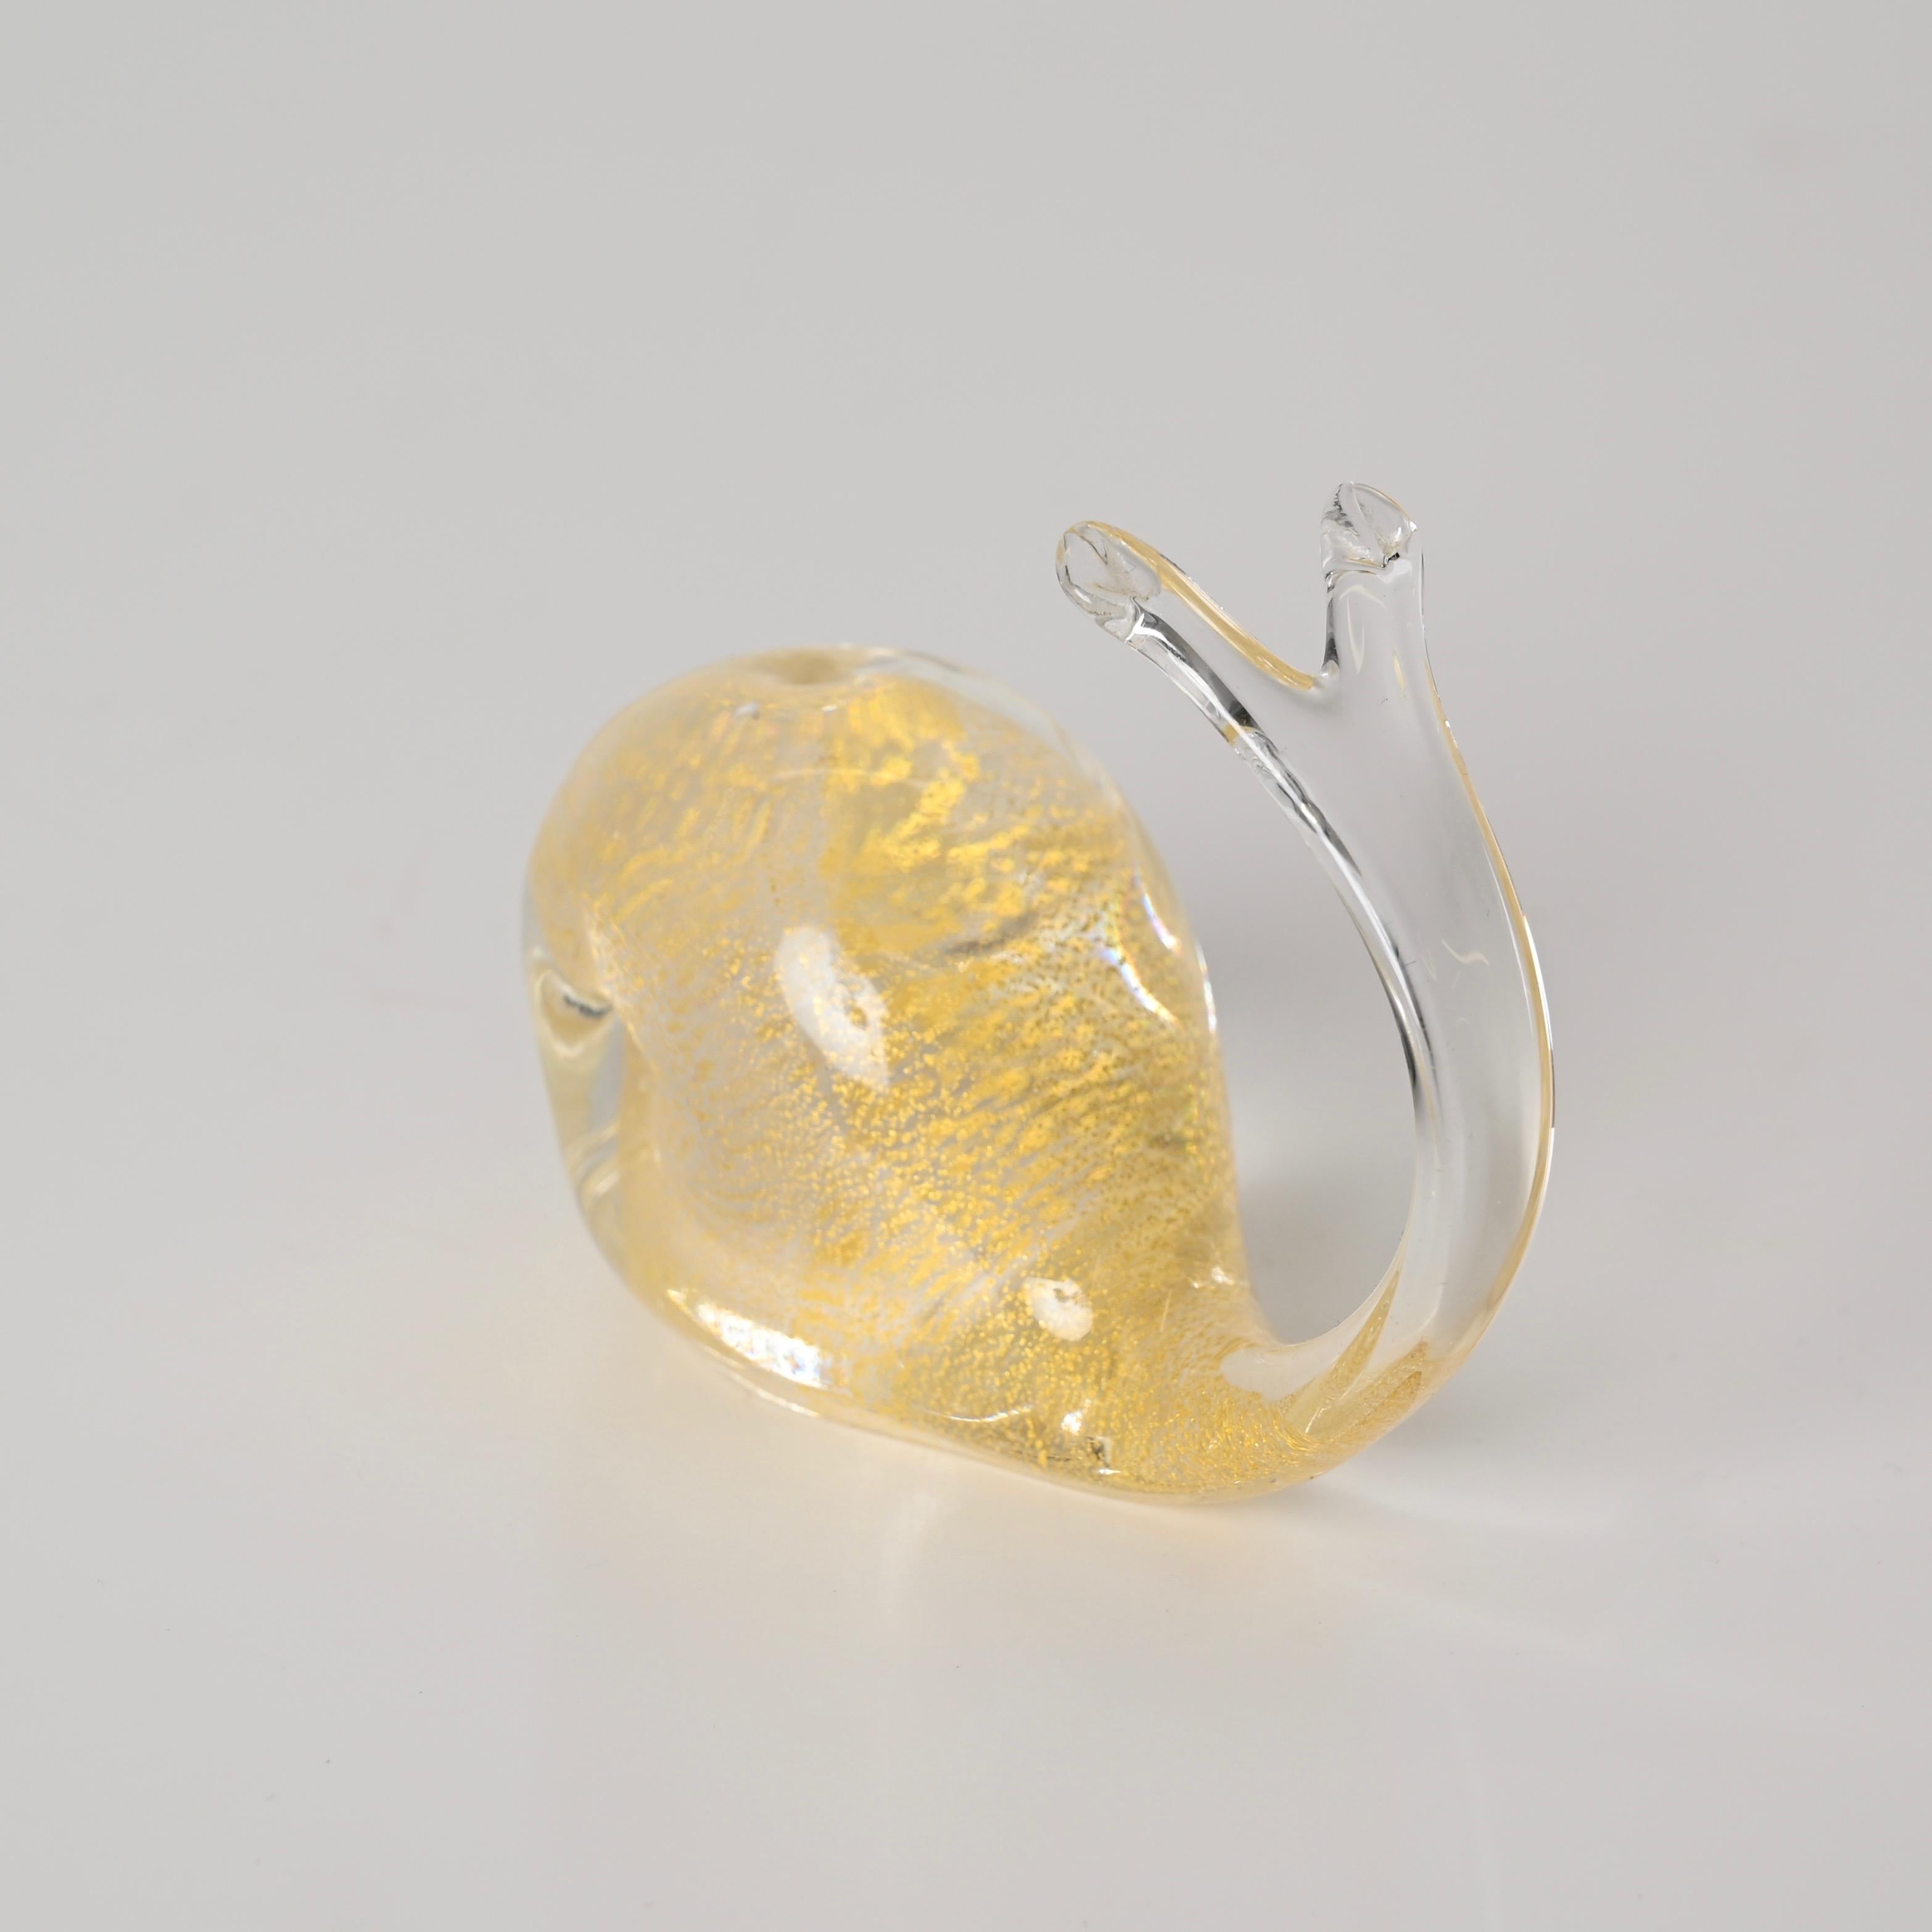 A. Seguso Whale Sculpture in Murano Glass with Gold Dust, Italy 1960s For Sale 2